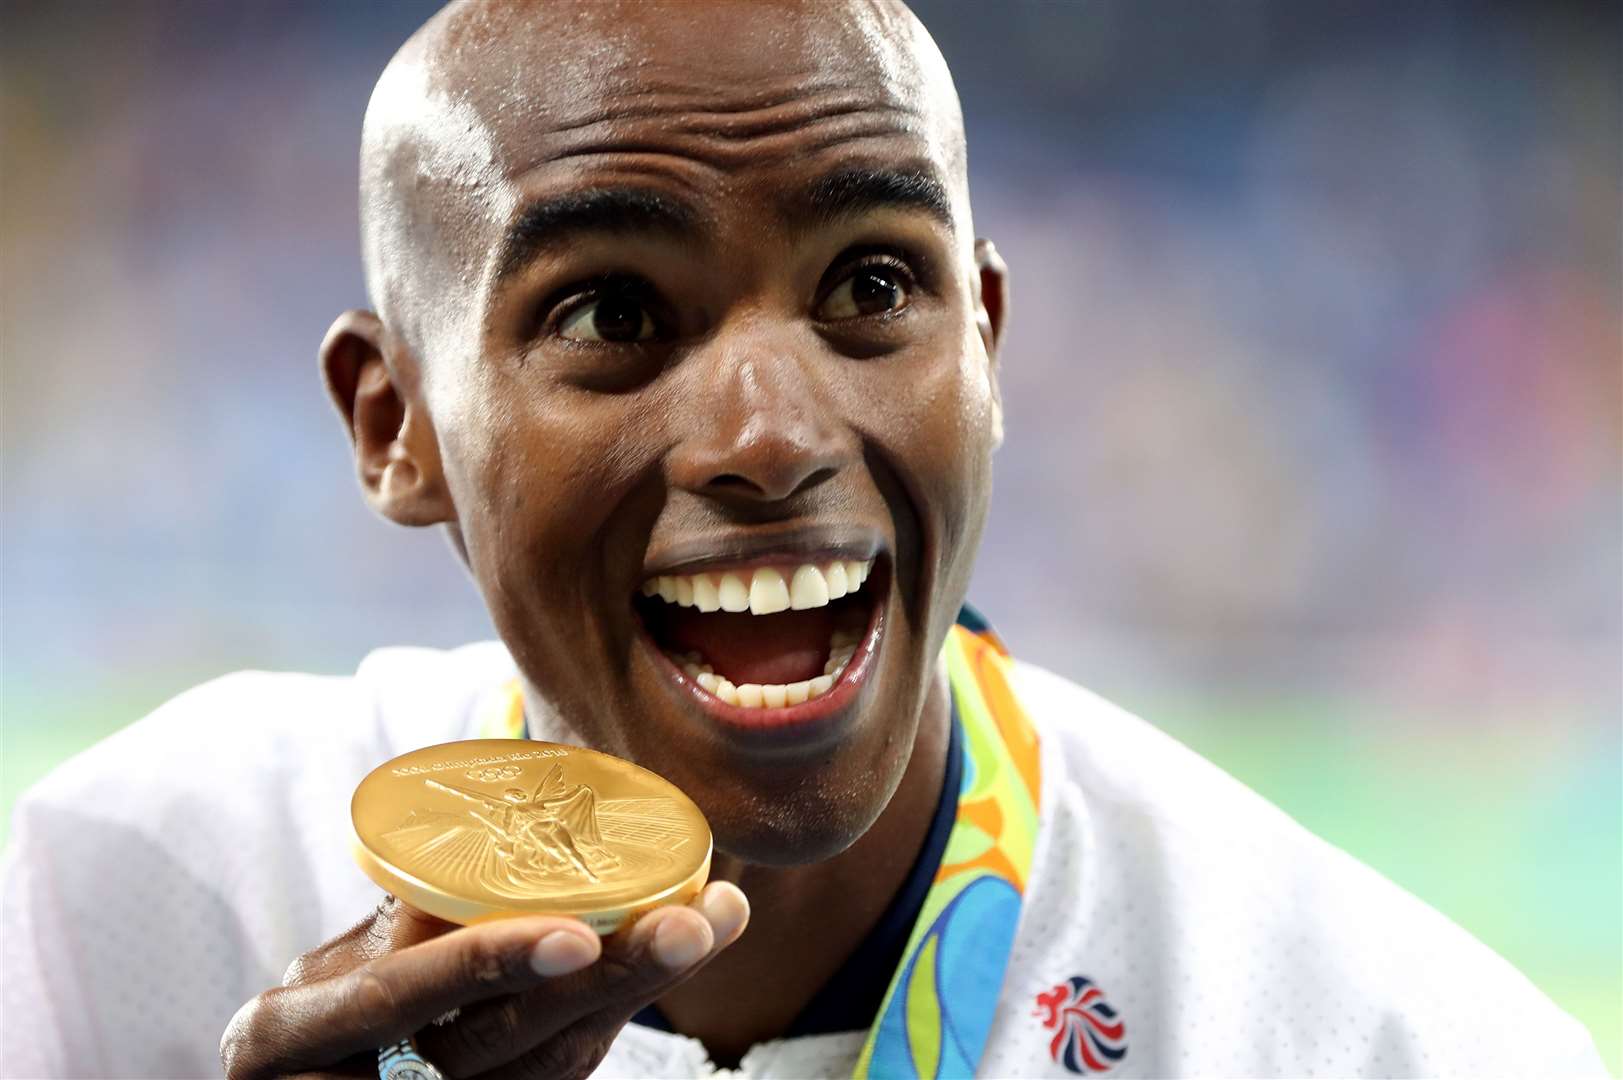 Sir Mo Farah with his gold medal following the men’s 10,000m final at the Olympics Stadium in Brazil (Owen Humphreys/PA)